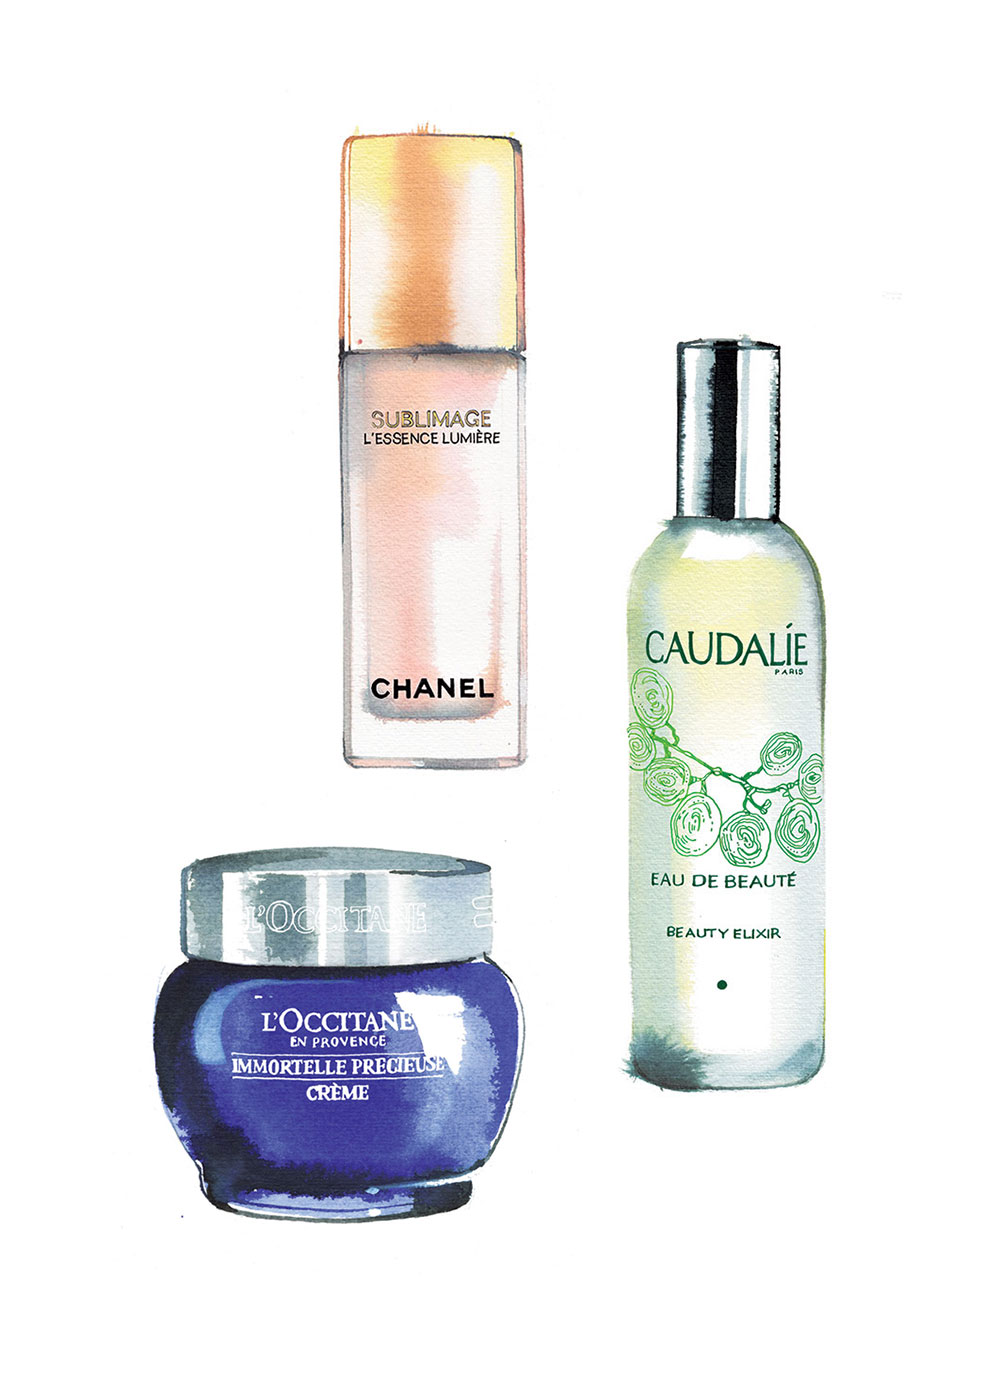 Illustration of Beauty Products Chanel Caudalie L'Occitane - Madame Figaro, 2019